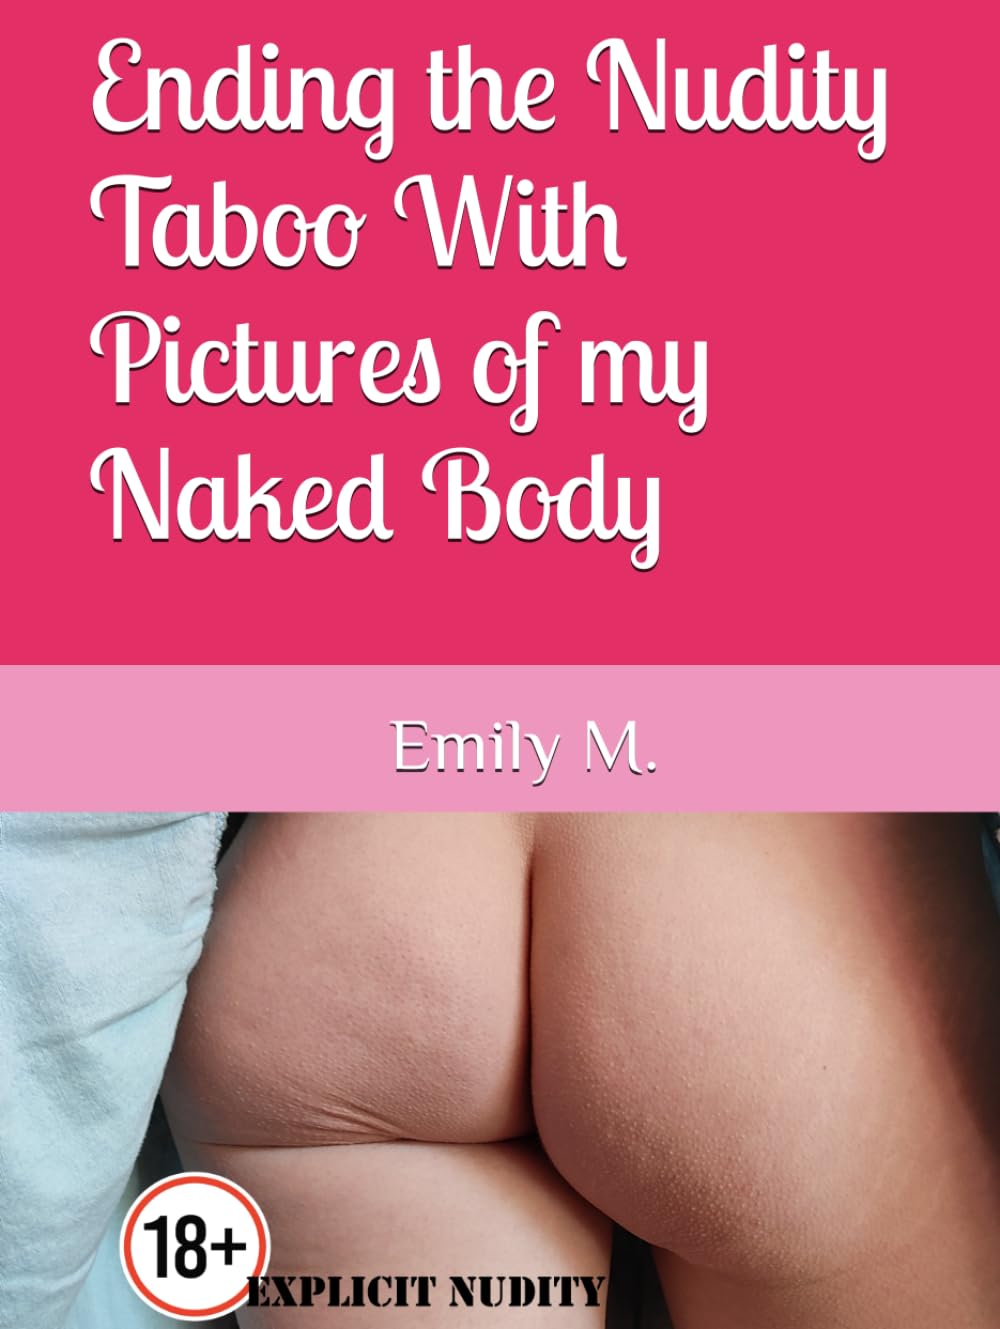 Ending the Nudity Taboo With Pictures of my Naked Body